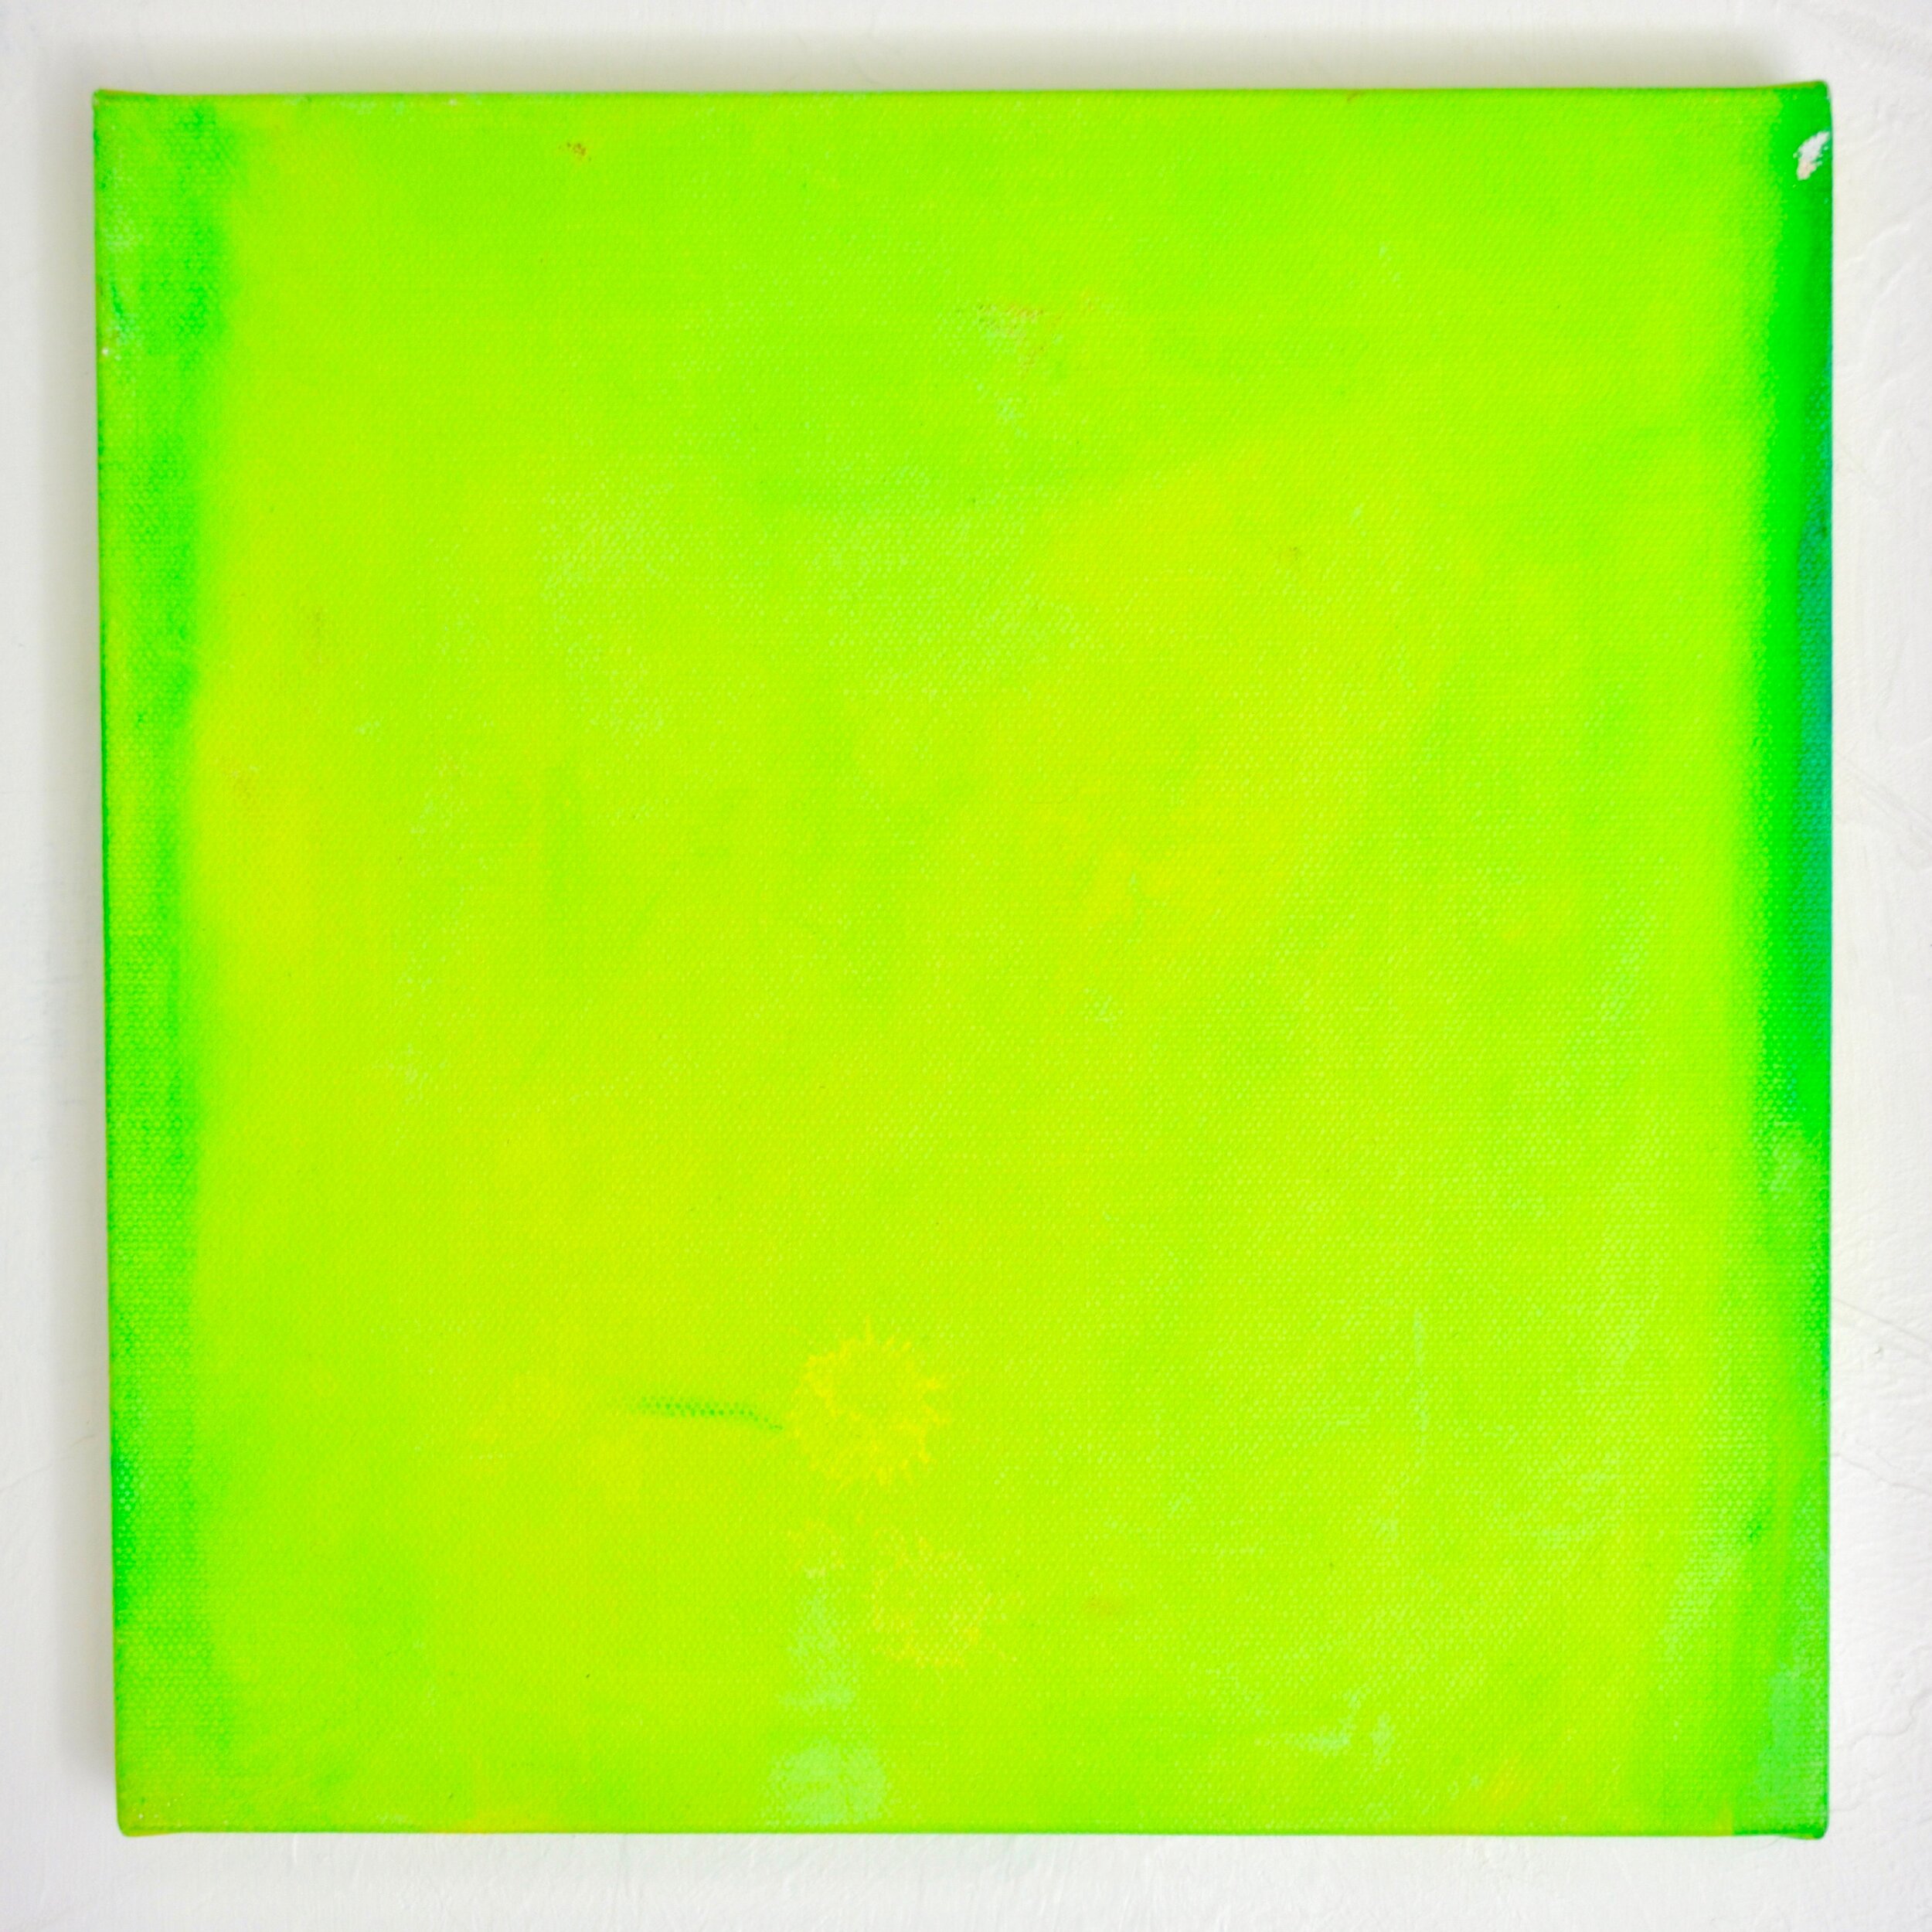  Jane Swavely,  Green Screen , 2020. Oil on canvas. 12 x 12 inches. 